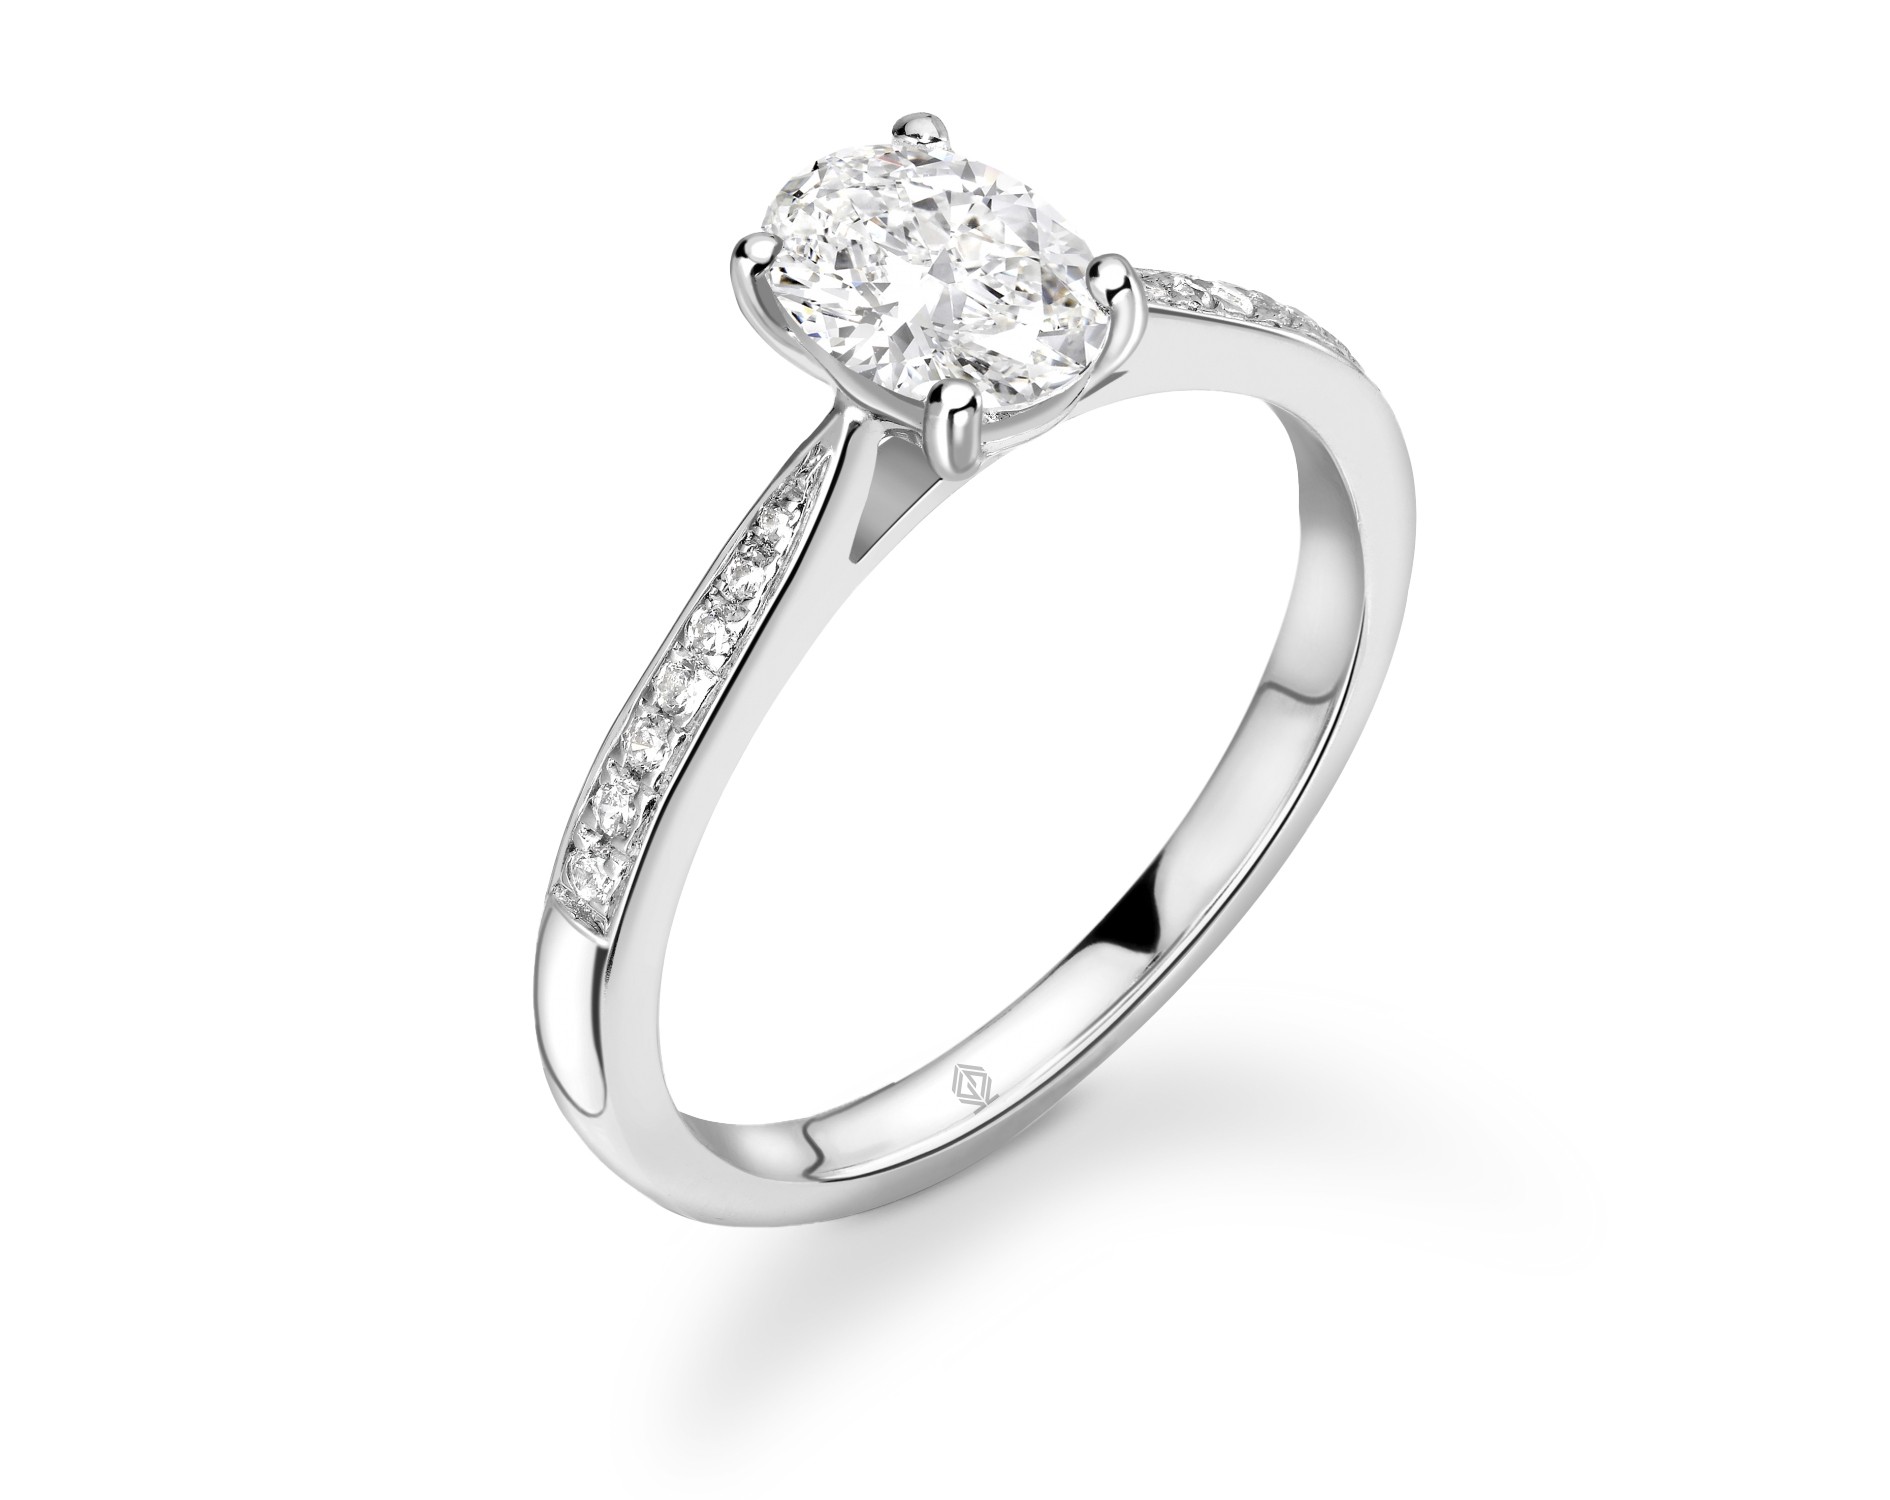 18K WHITE GOLD OVAL CUT DIAMOND ENGAGEMENT RING WITH SIDE STONES CHANNEL SET